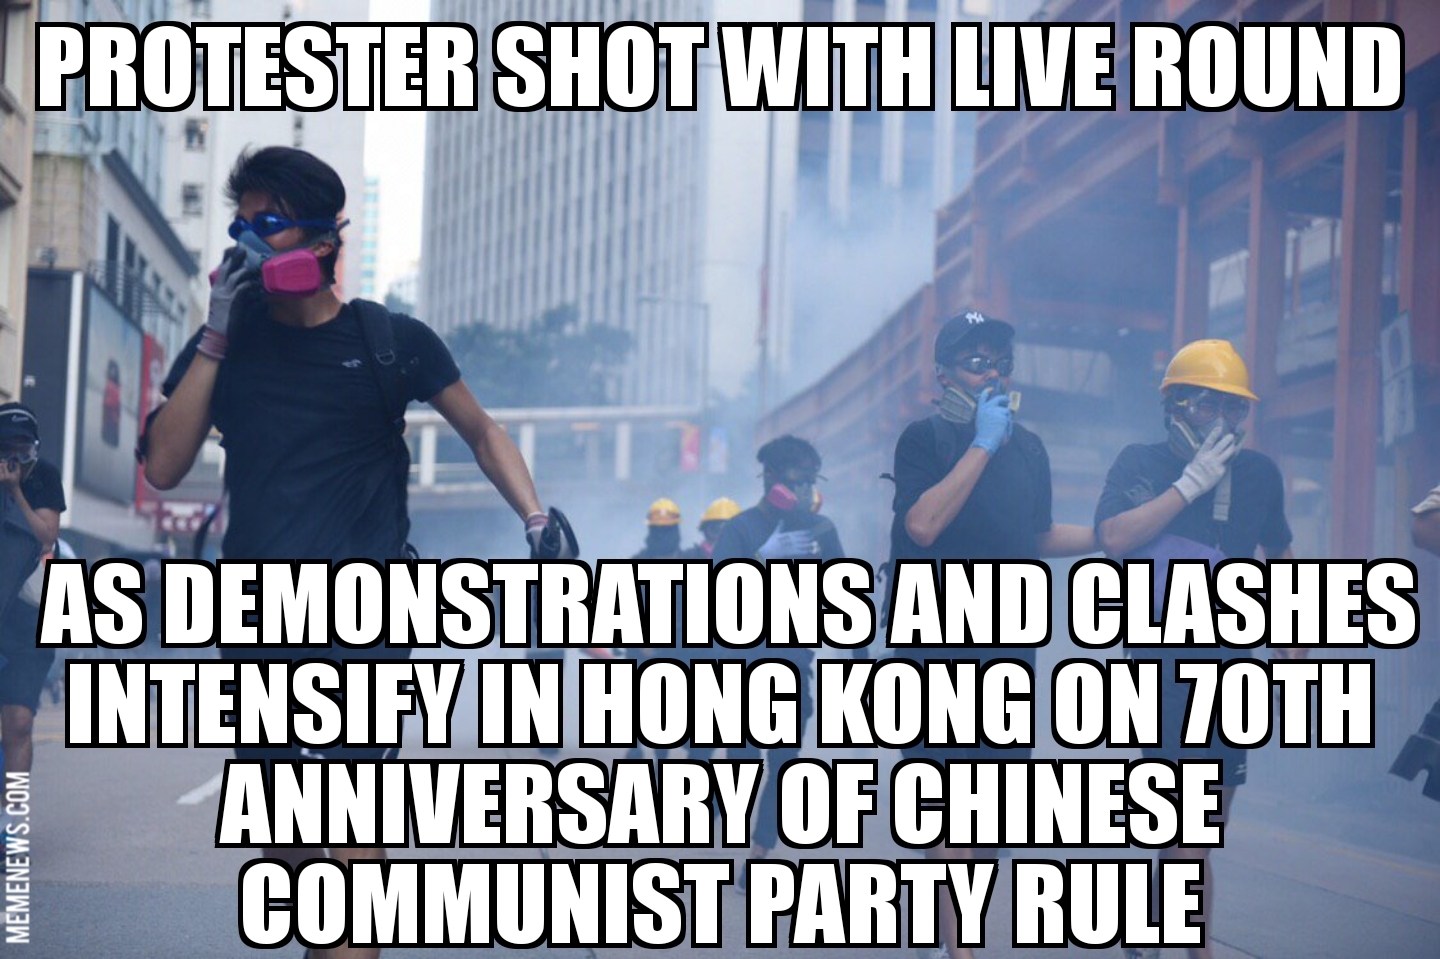 Protester shot in Hong Kong protests on 70th anniversary of China Communist rule